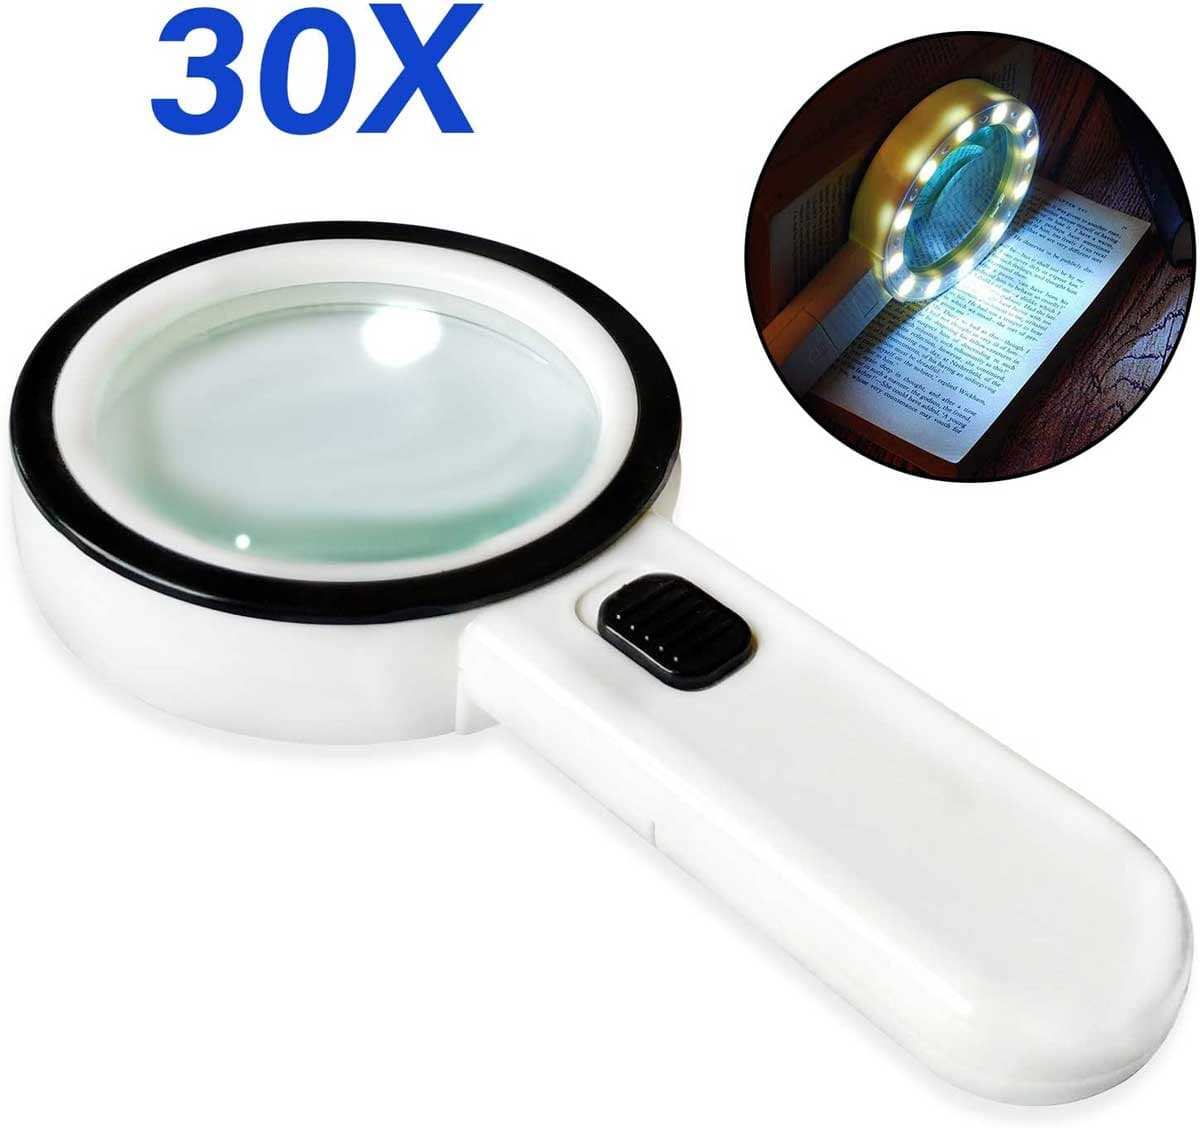 NEW: 3 Round 2x LED Lighted Magnifier